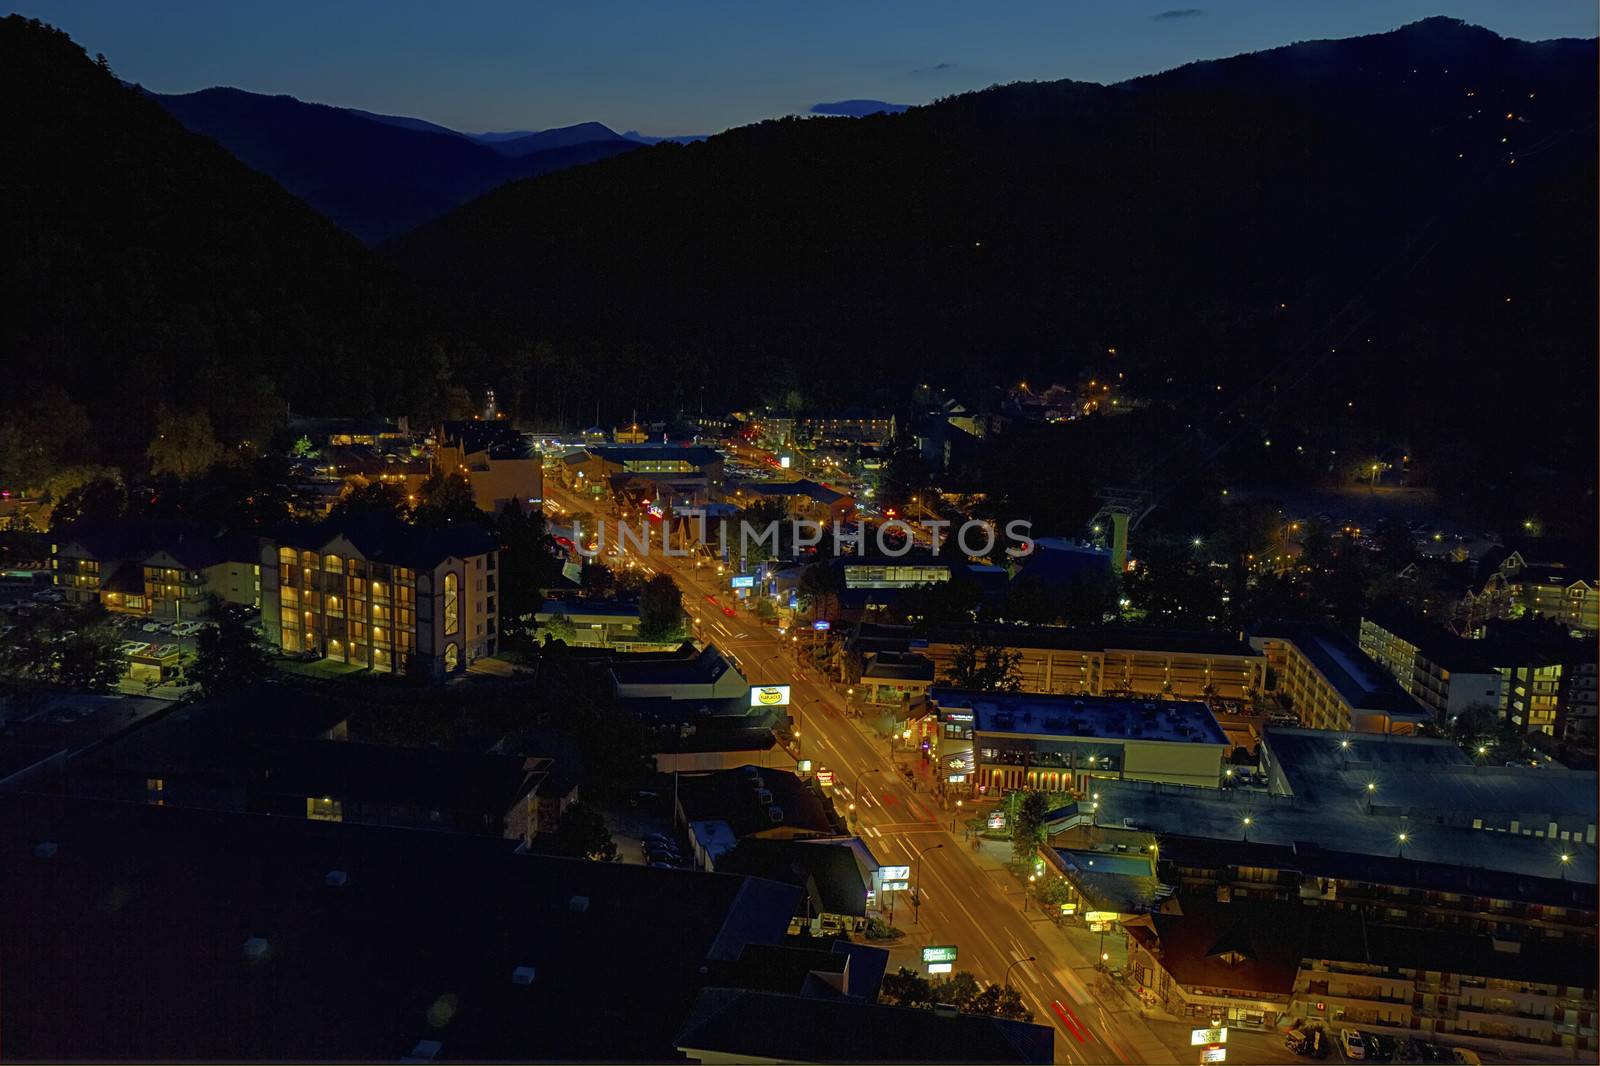 GATLINBURG, TENNESSEE - OCTOBER 5: Aerial night view of Gatlinburg, Tennessee on October 5, 2013. Gatlinburg is a major tourist destination and gateway to the Great Smoky Mountains National Park.